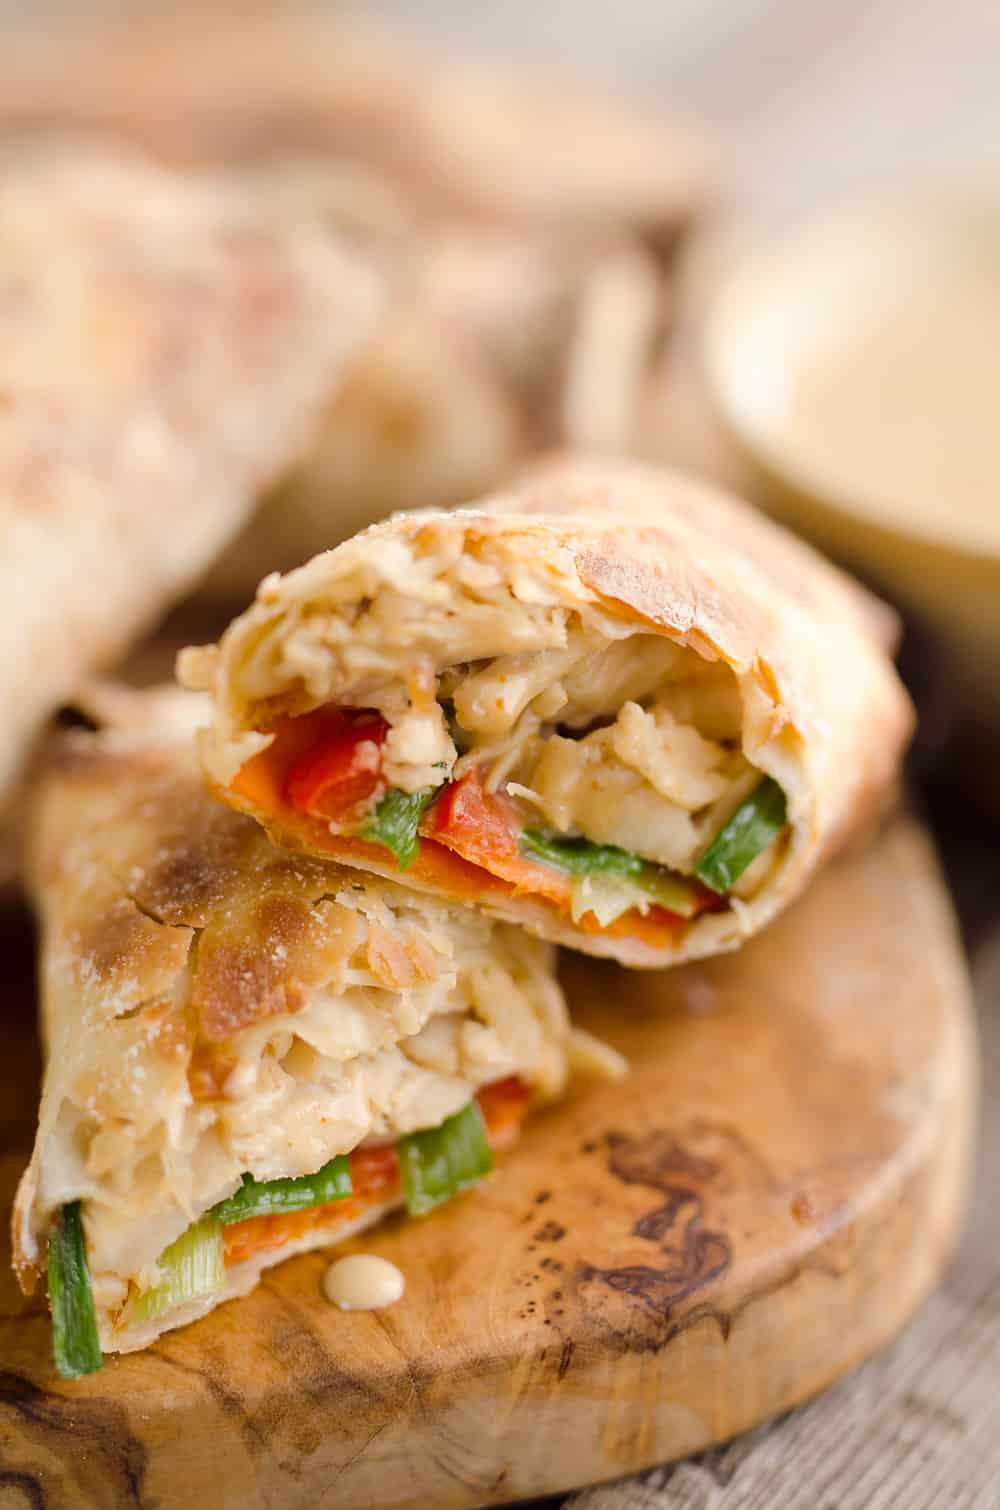 Airfryer Baked Thai Peanut Chicken Egg Rolls are a light and healthy recipe made in your Airfryer or oven. Chicken is tossed with creamy Thai peanut sauce, carrots, red peppers and green onions and rolled in crispy egg roll wrappers for a flavorful dinner you can make in just 20 minutes. 